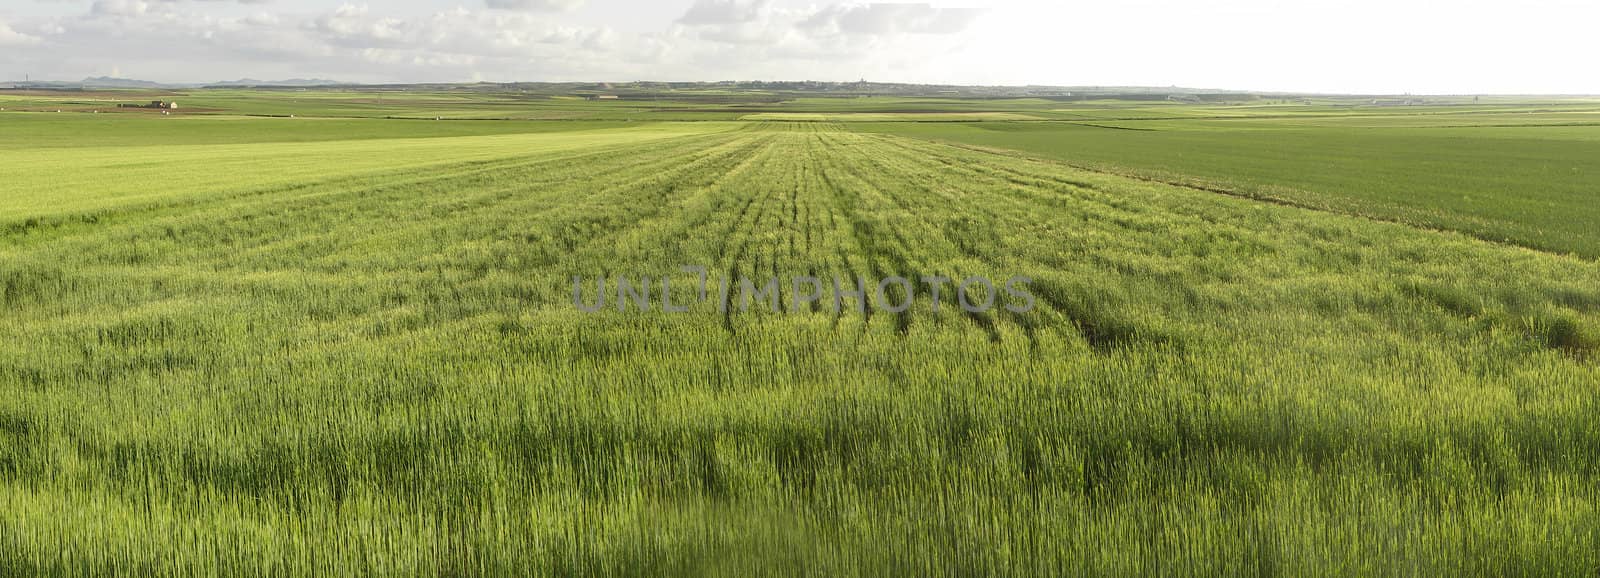 Cultivated field by lillo